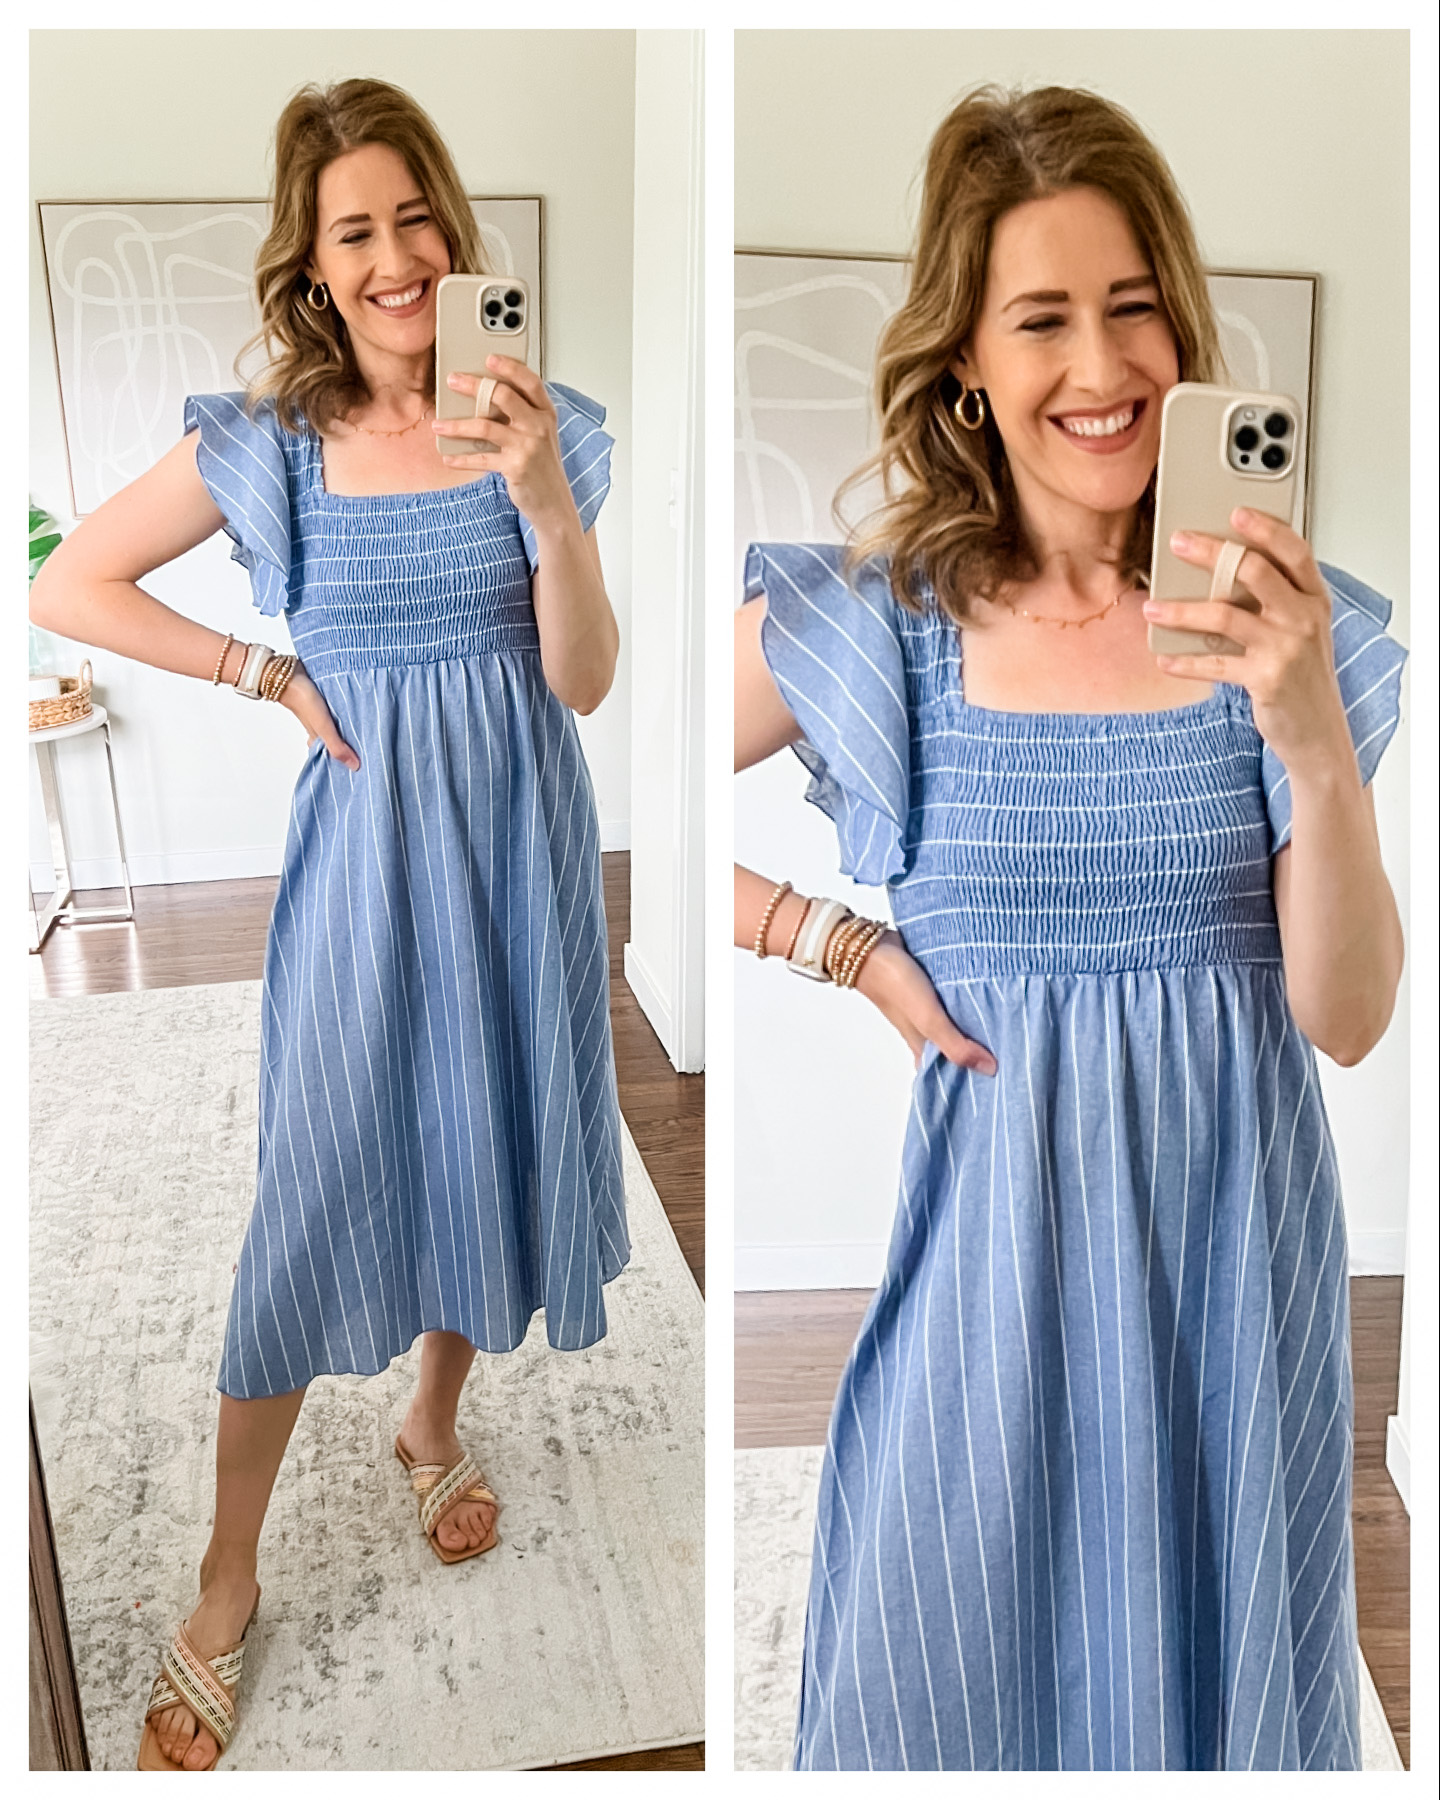 Cupshe try-on haul; modest affordable beach summer vacation pool dresses